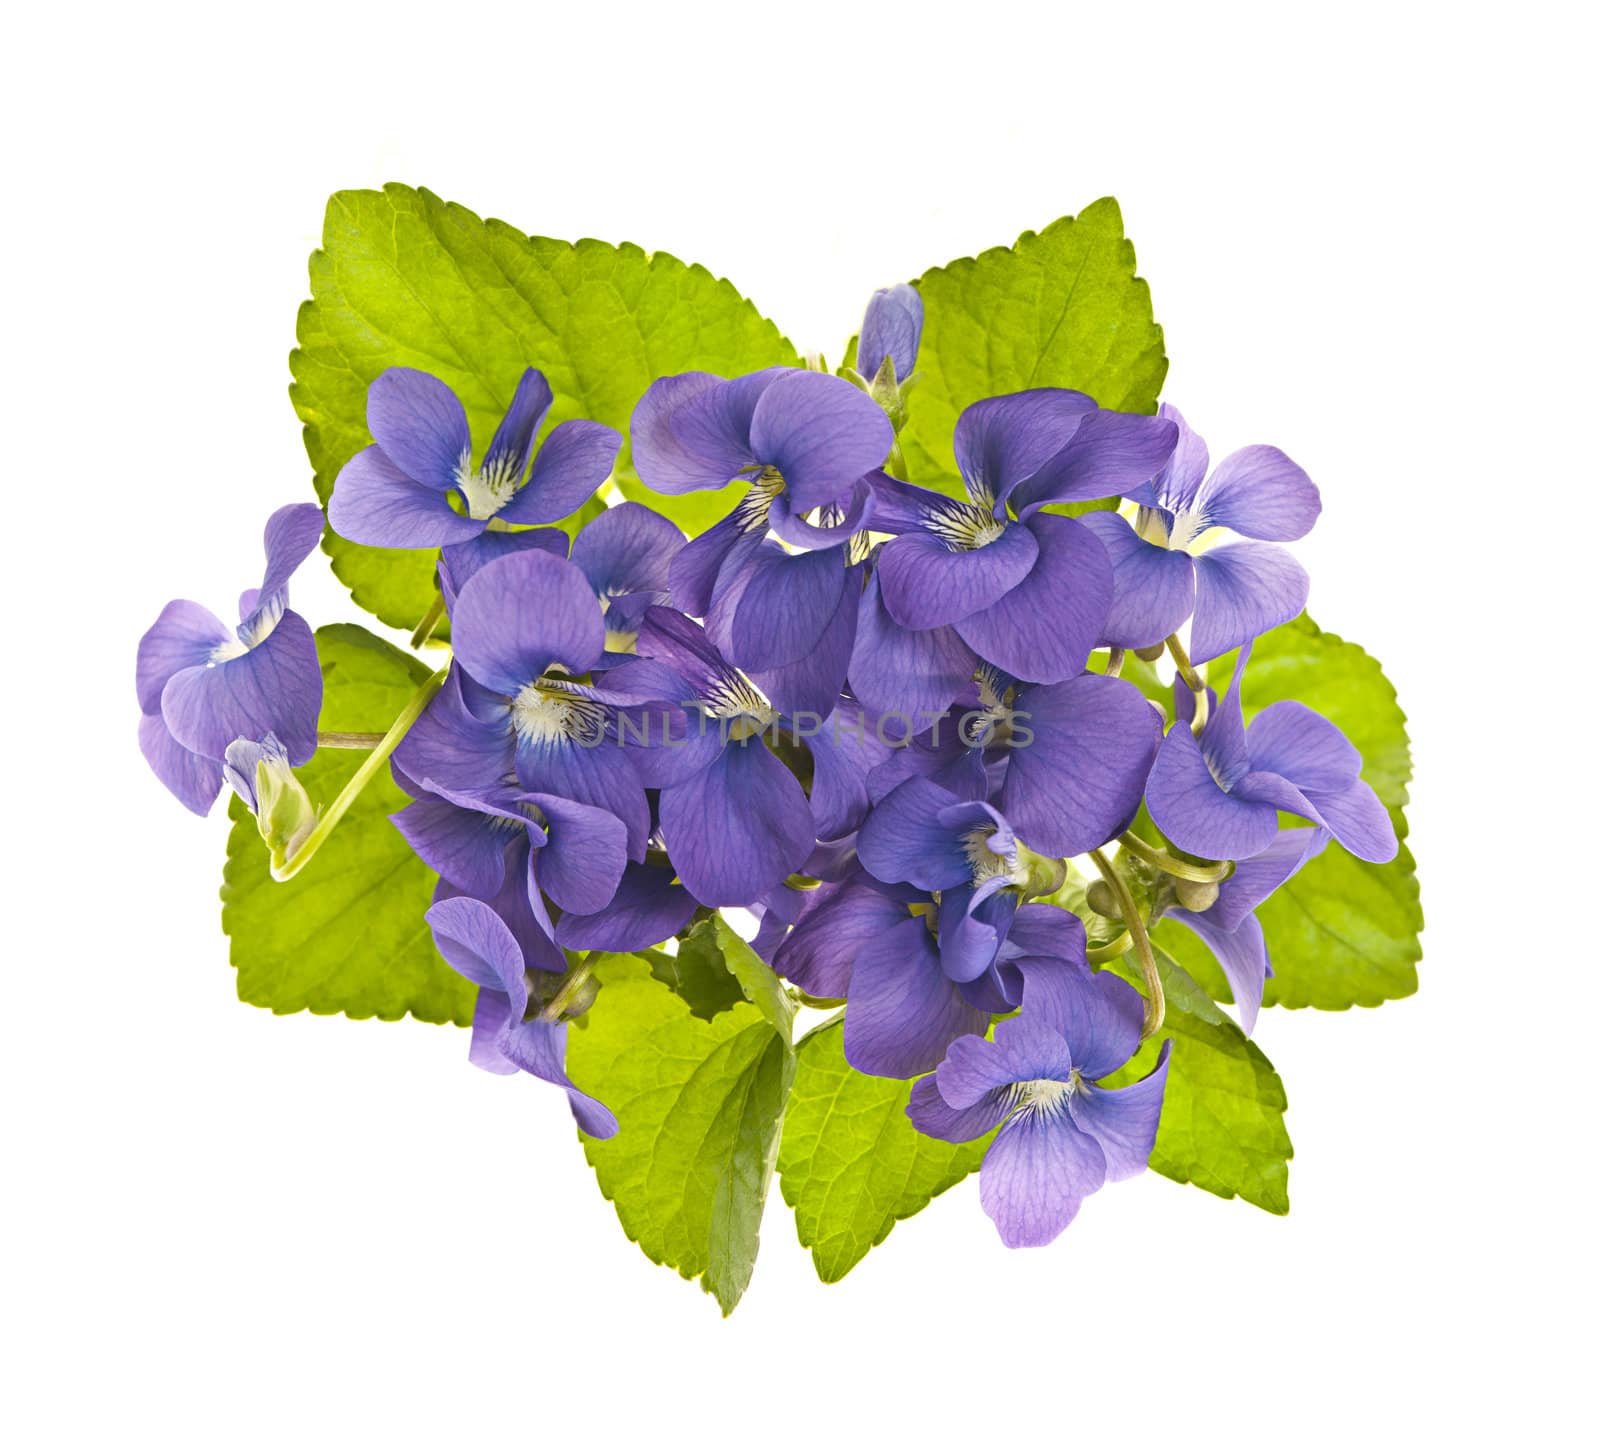 Arrangement of purple wild violets with leaves isolated on white